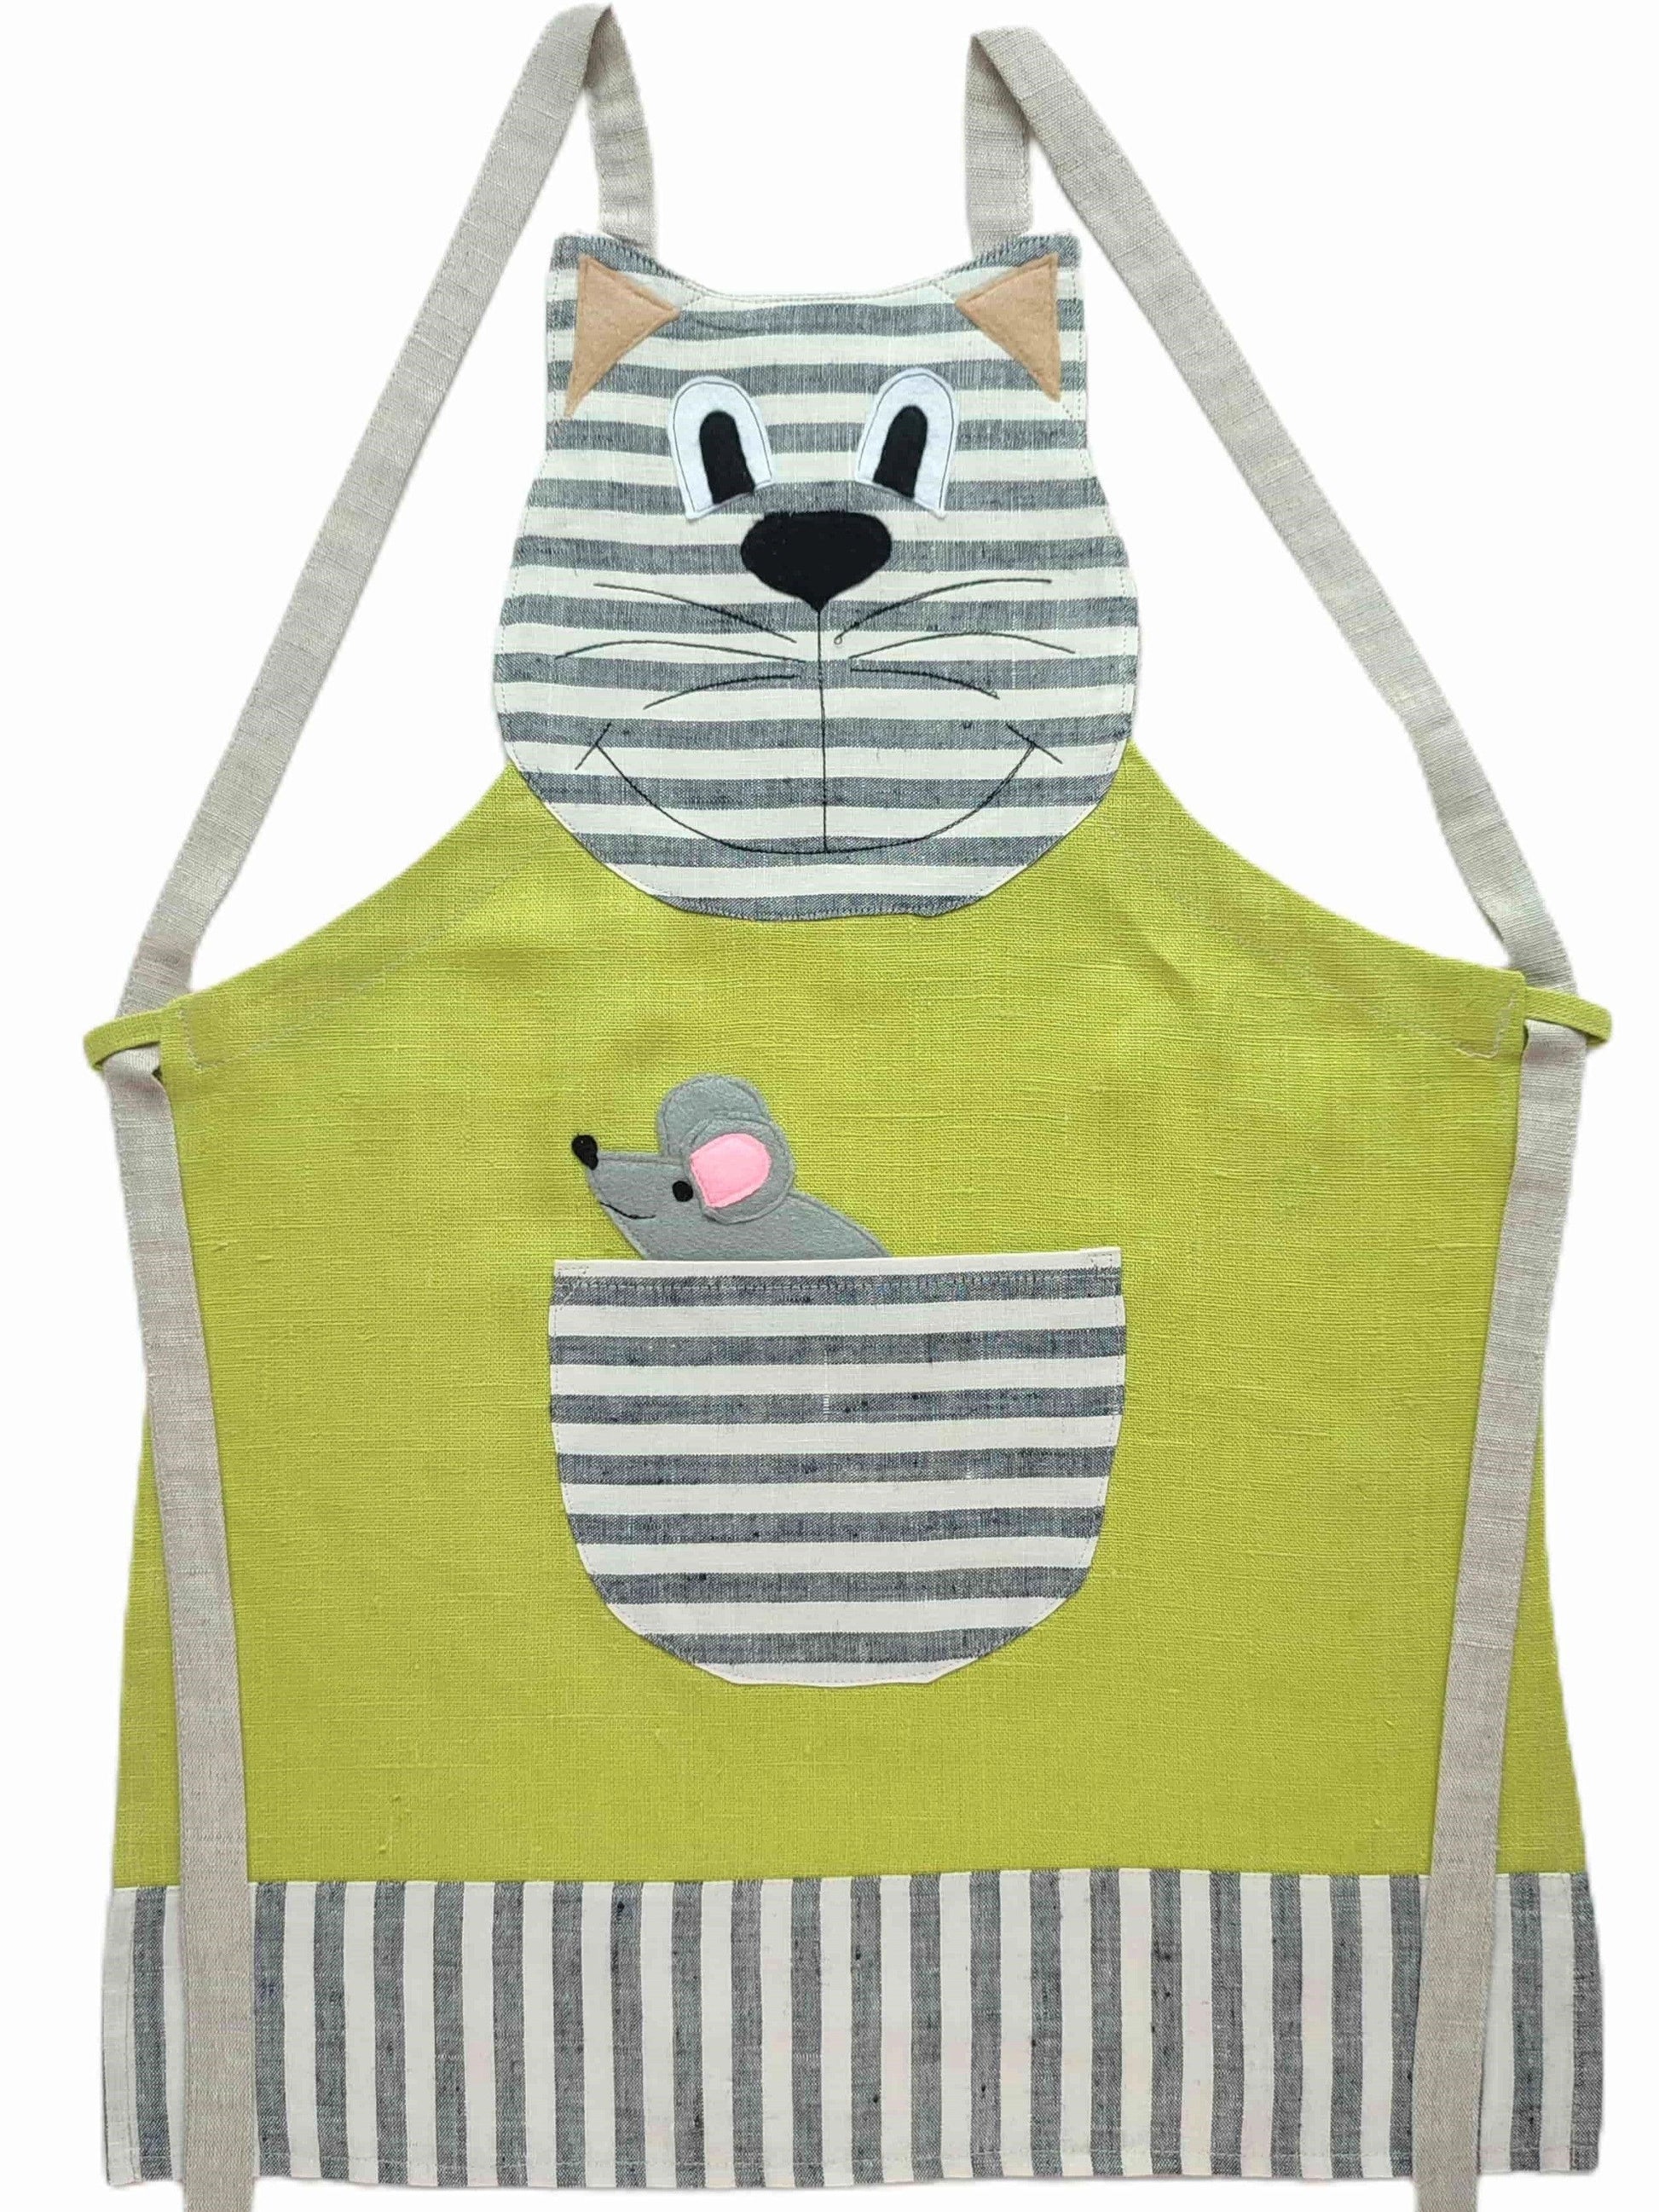 Children's apron (4-8 years old) WILLY - Linen4me